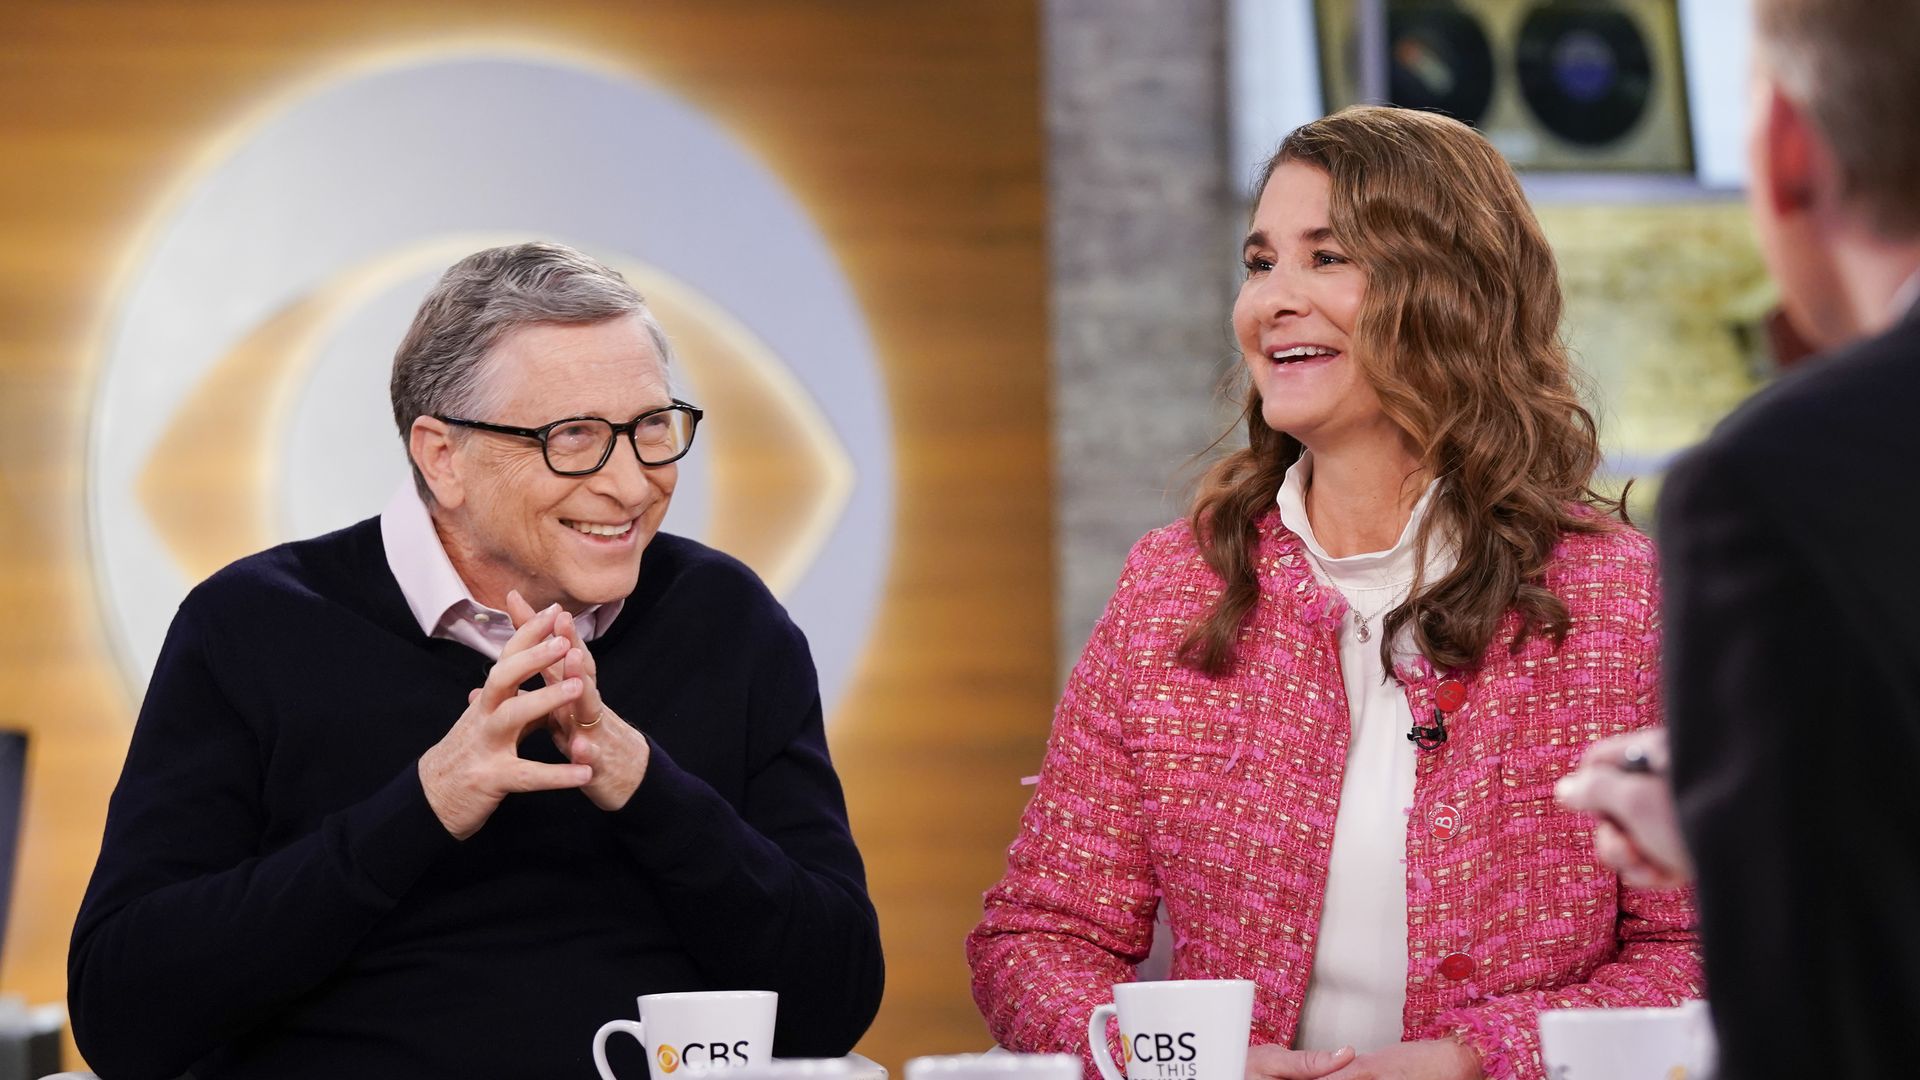 Bill Gates and Melinda Gates laugh on the set of CBS this morning, with the CBS symbol in the background.